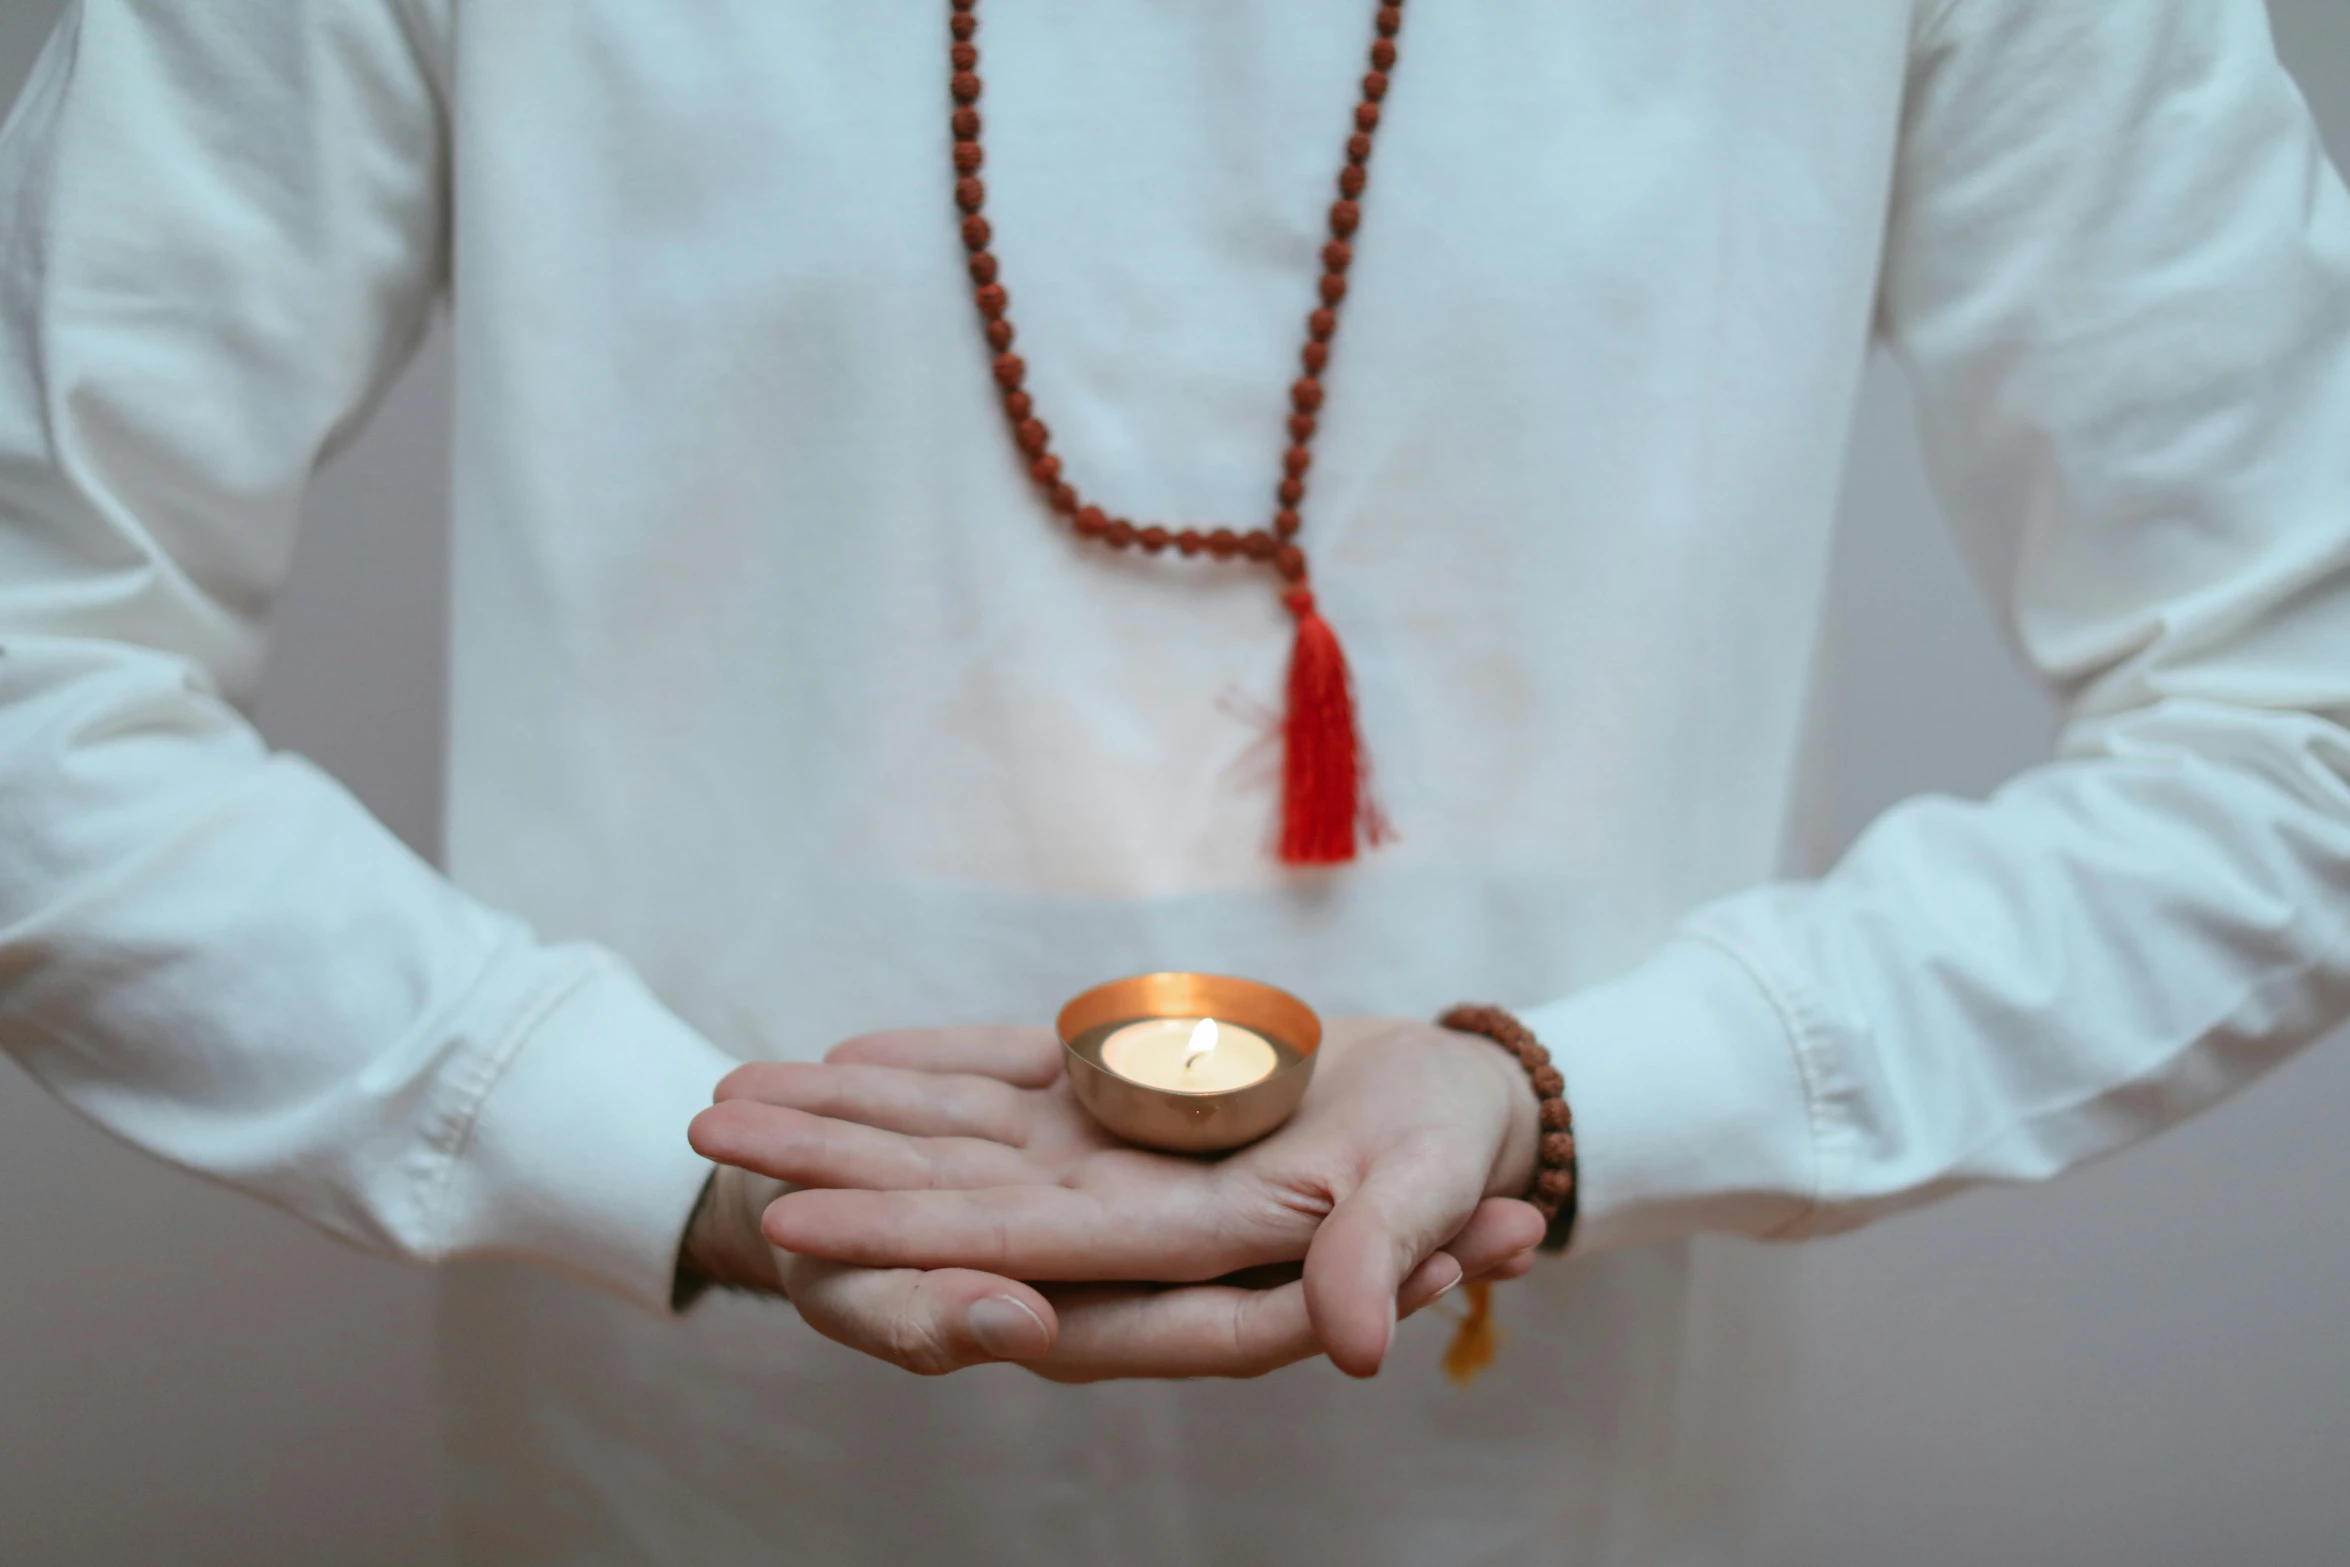 a person holding an object in their hand with a candle in it